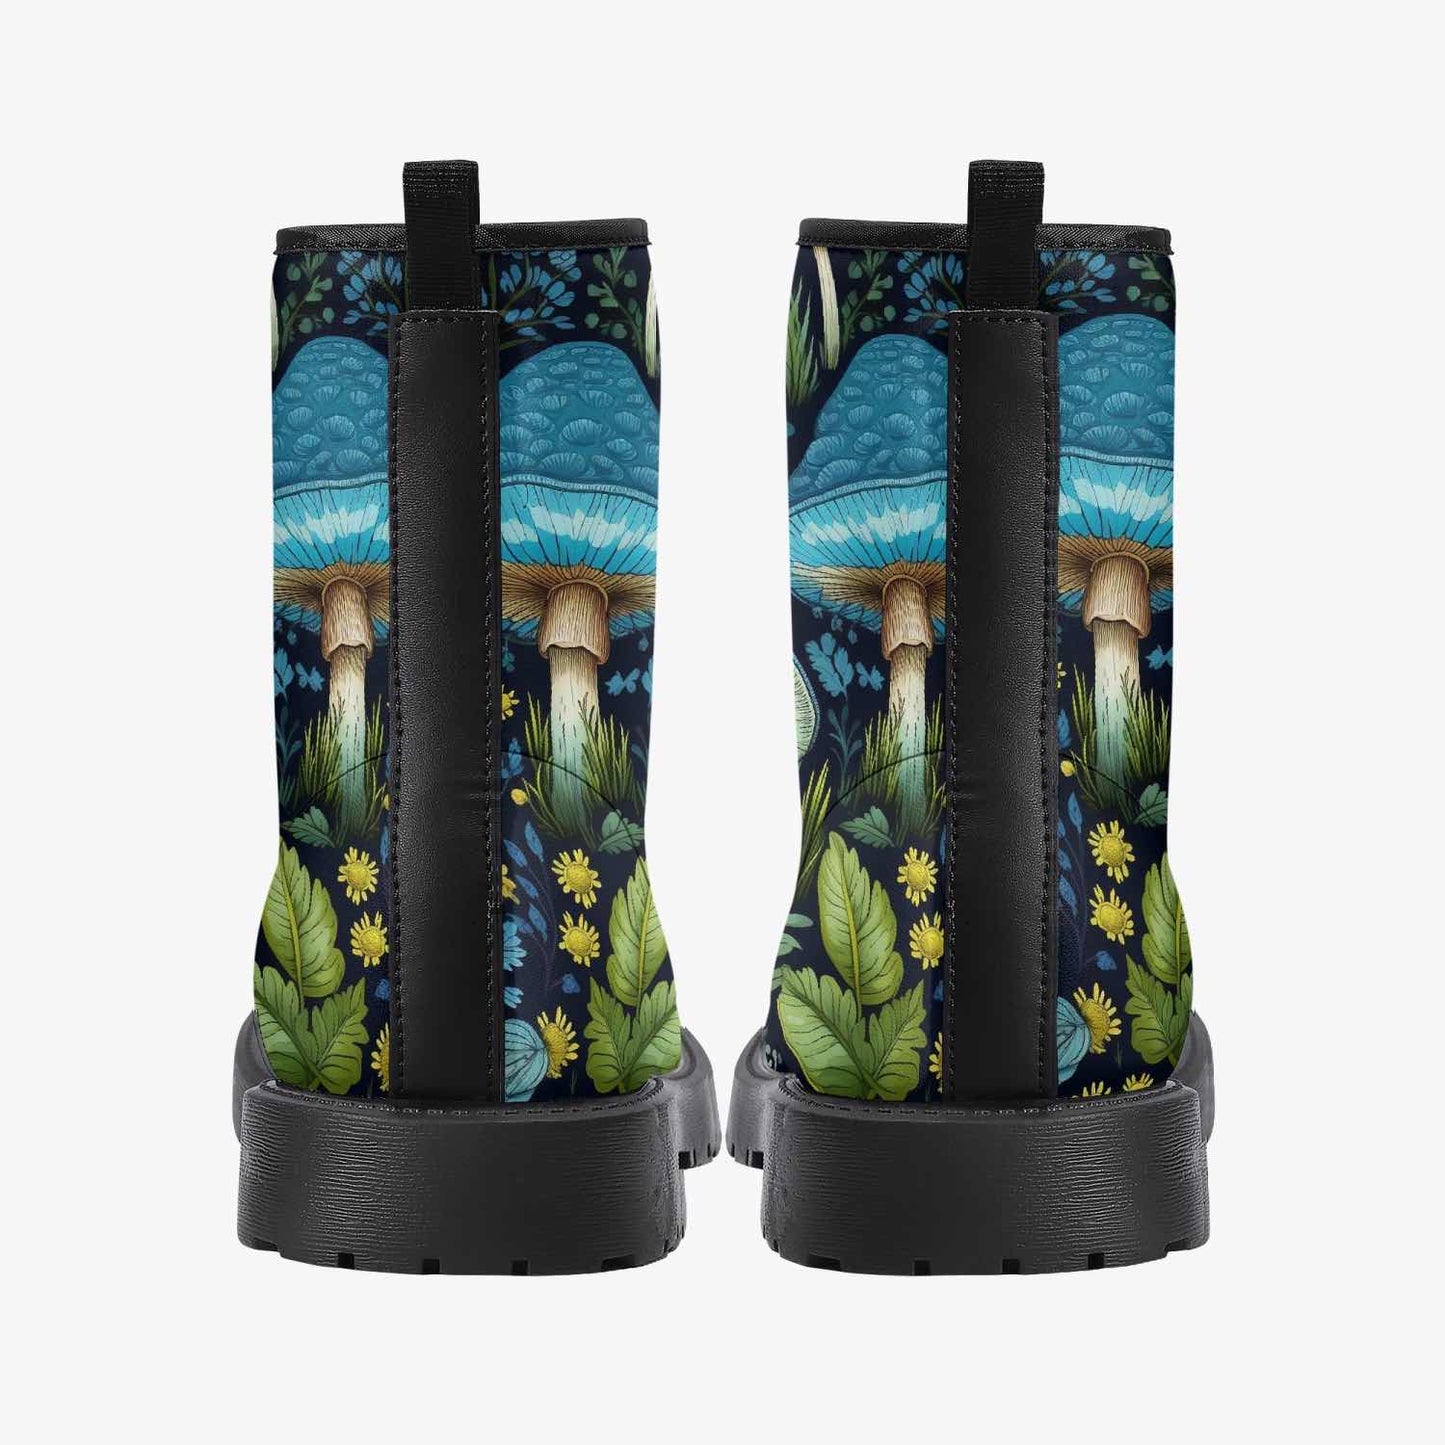 back view of the vegan Mushroomcore toadstool forest boots in blues and greens